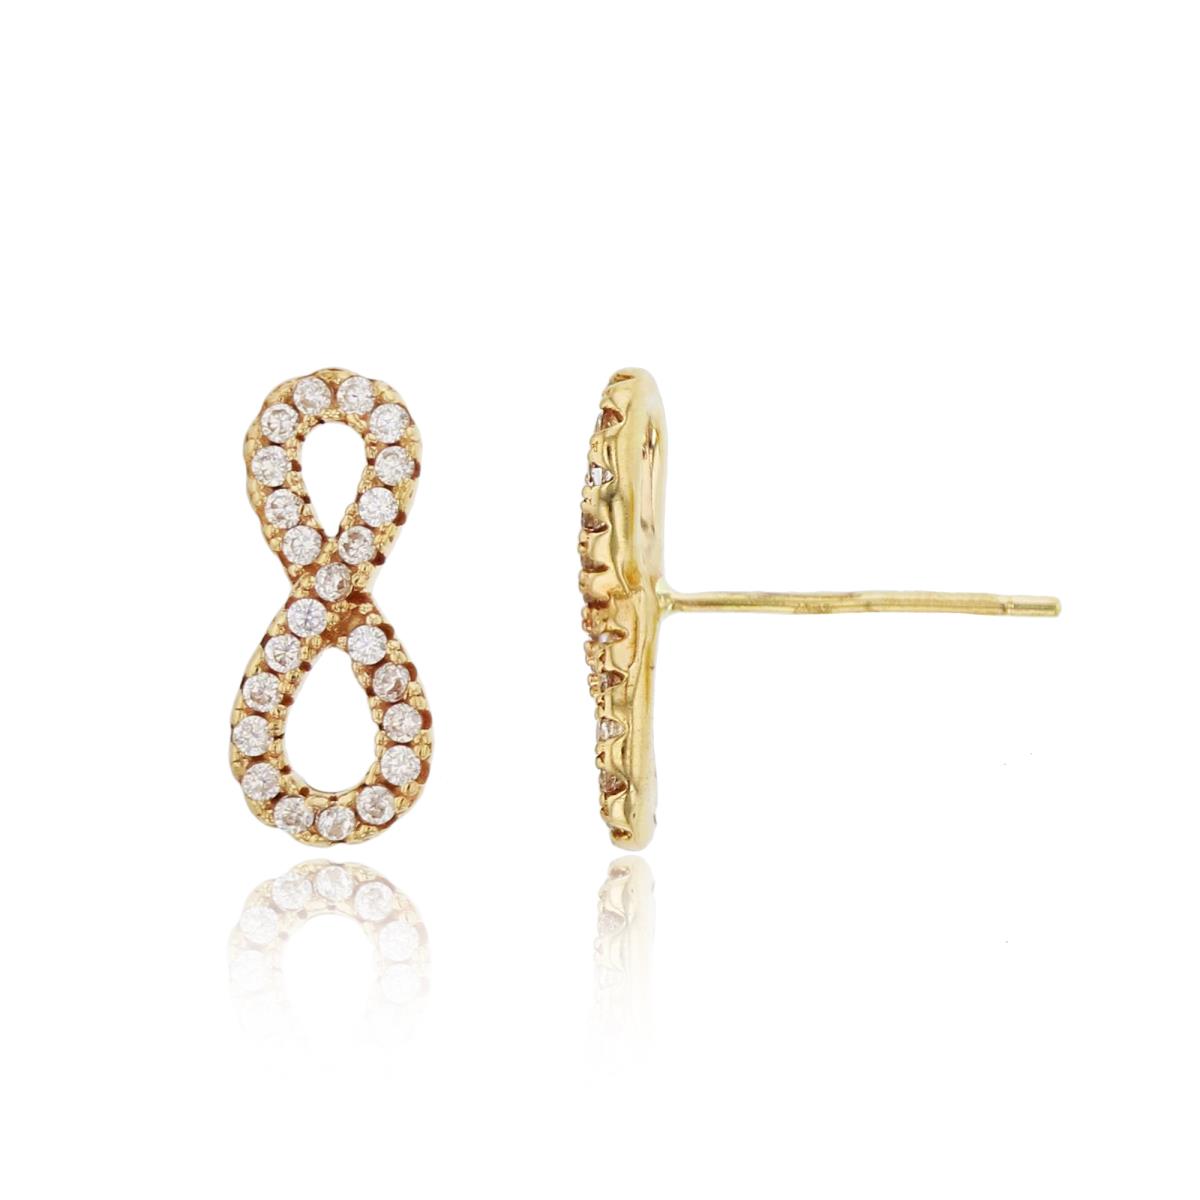 10K Yellow Gold Micropave Infinity Stud Earring (No Back)